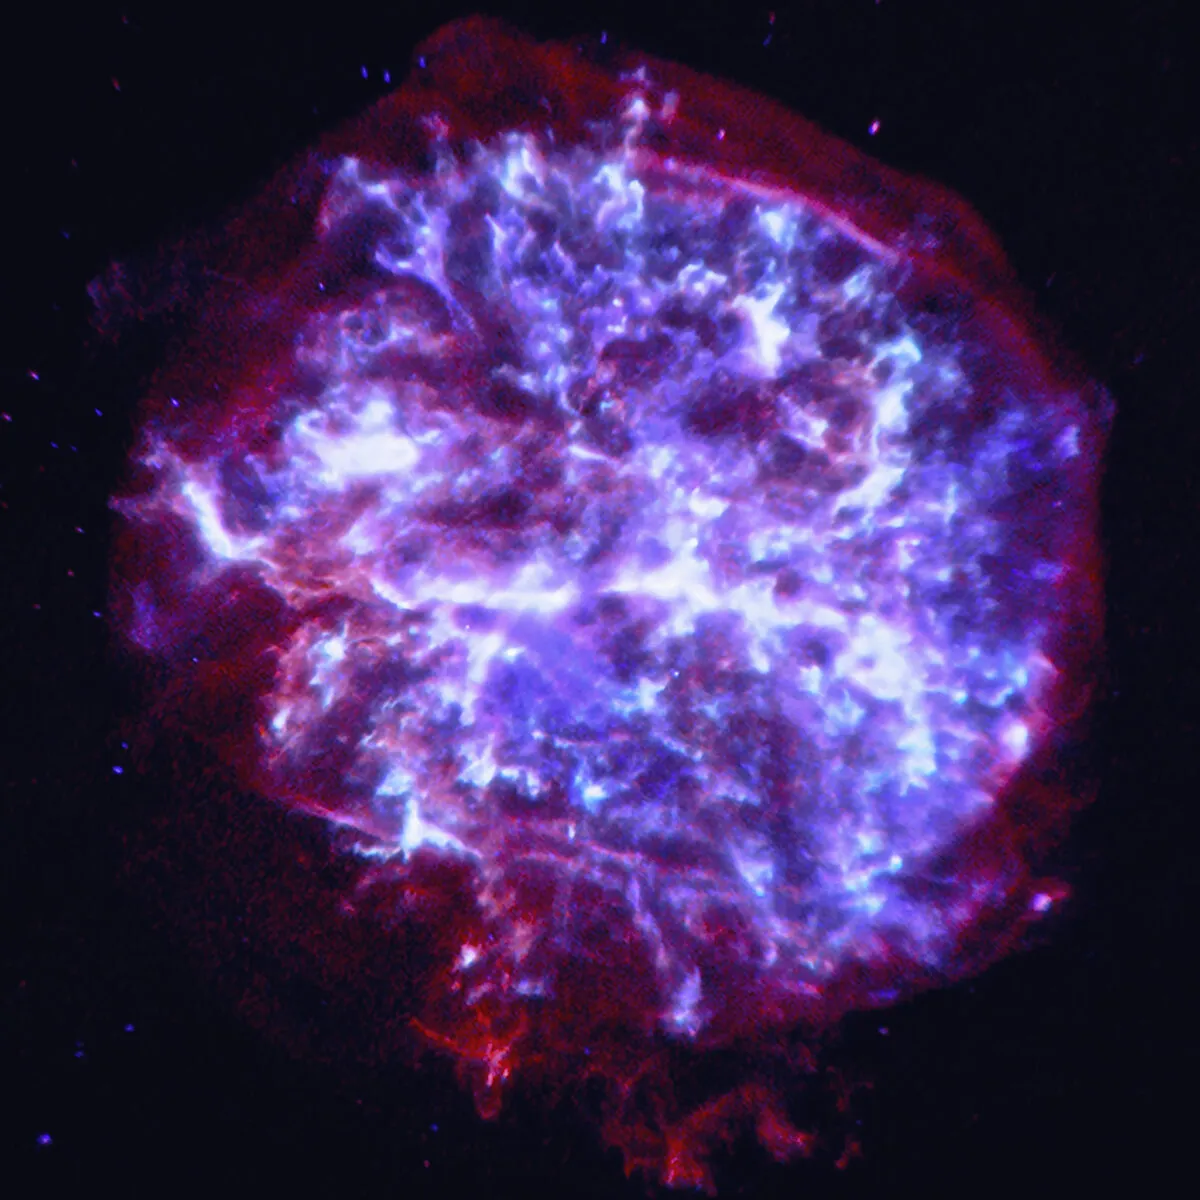 G292.0 1.8 When stars explode as a supernova, they leave behind objects known as supernova remnants. Credit: NASA/CXC/University of Texas/J. Bhalerao et al.